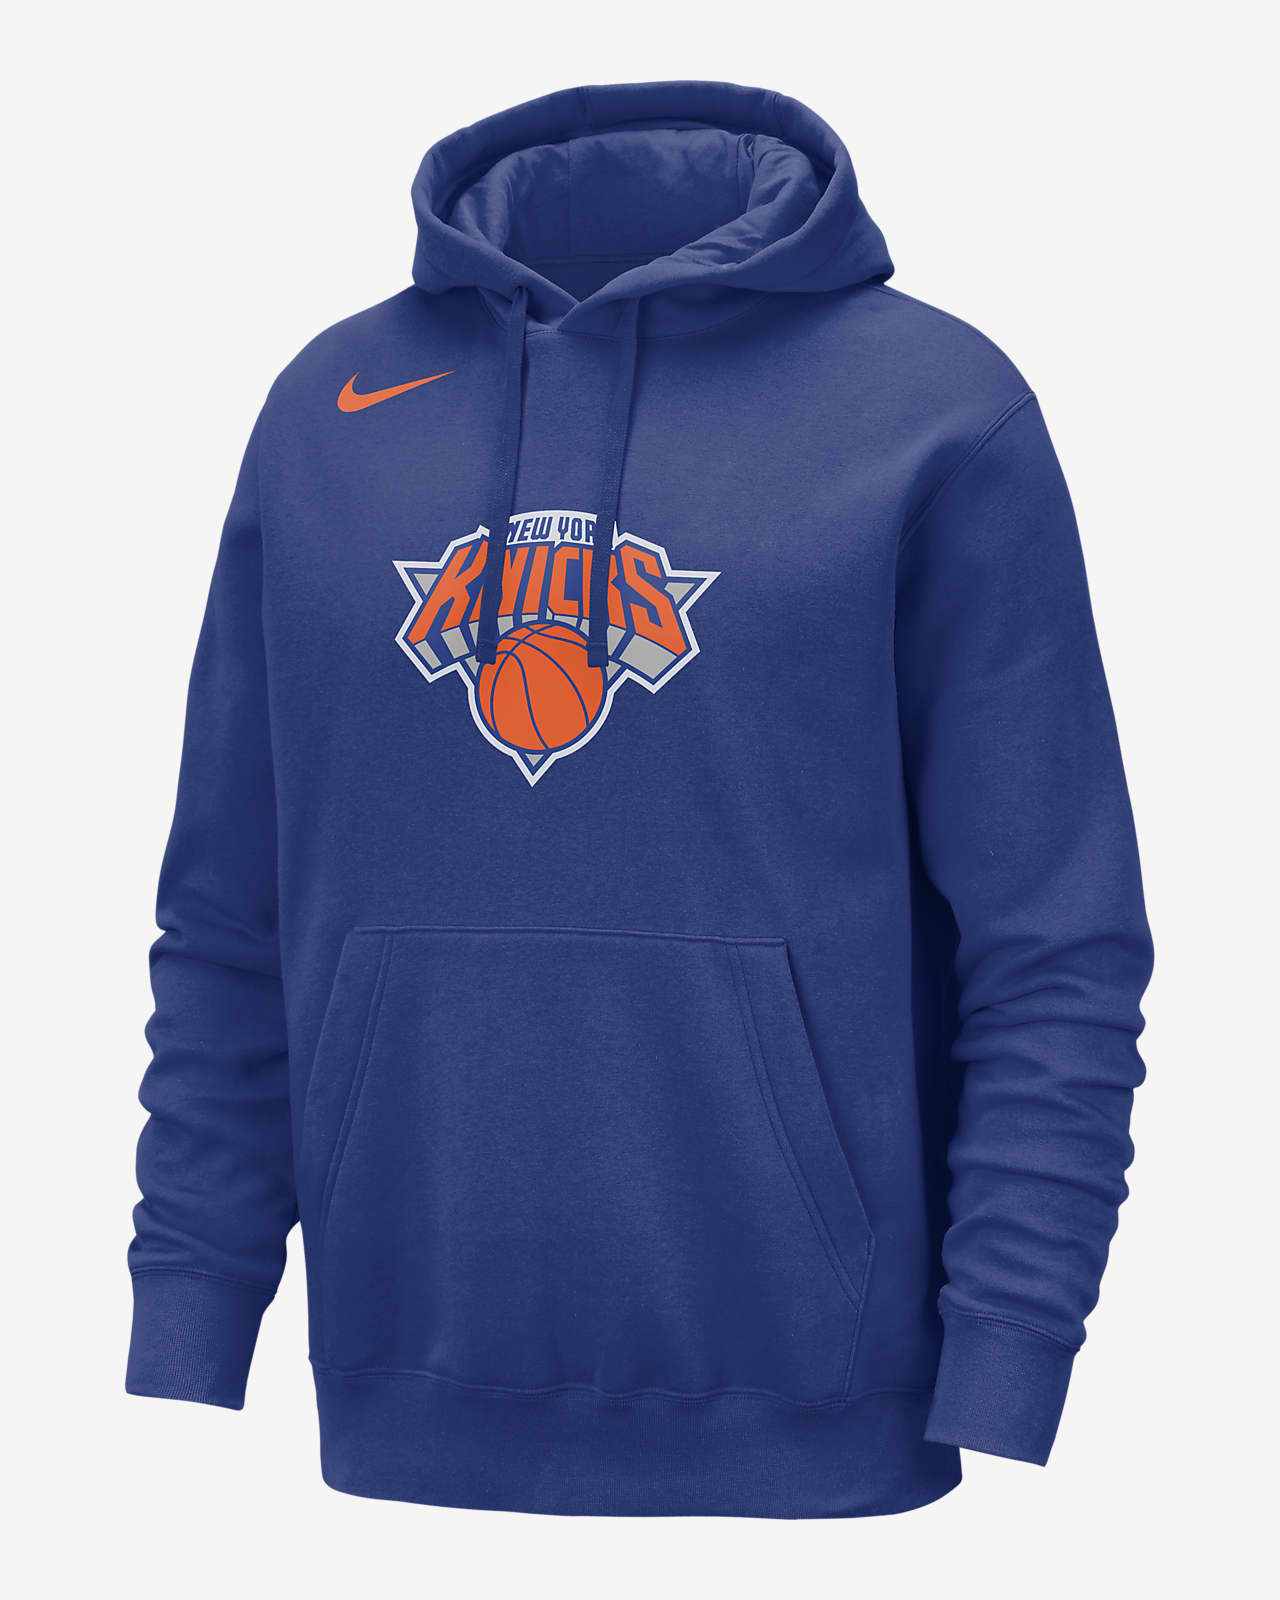 https://static.nike.com/a/images/t_PDP_1280_v1/f_auto,q_auto:eco/3afdb249-3c56-46e7-97a5-98acca2a5bfd/new-york-knicks-club-nba-pullover-hoodie-vPZSwx.png